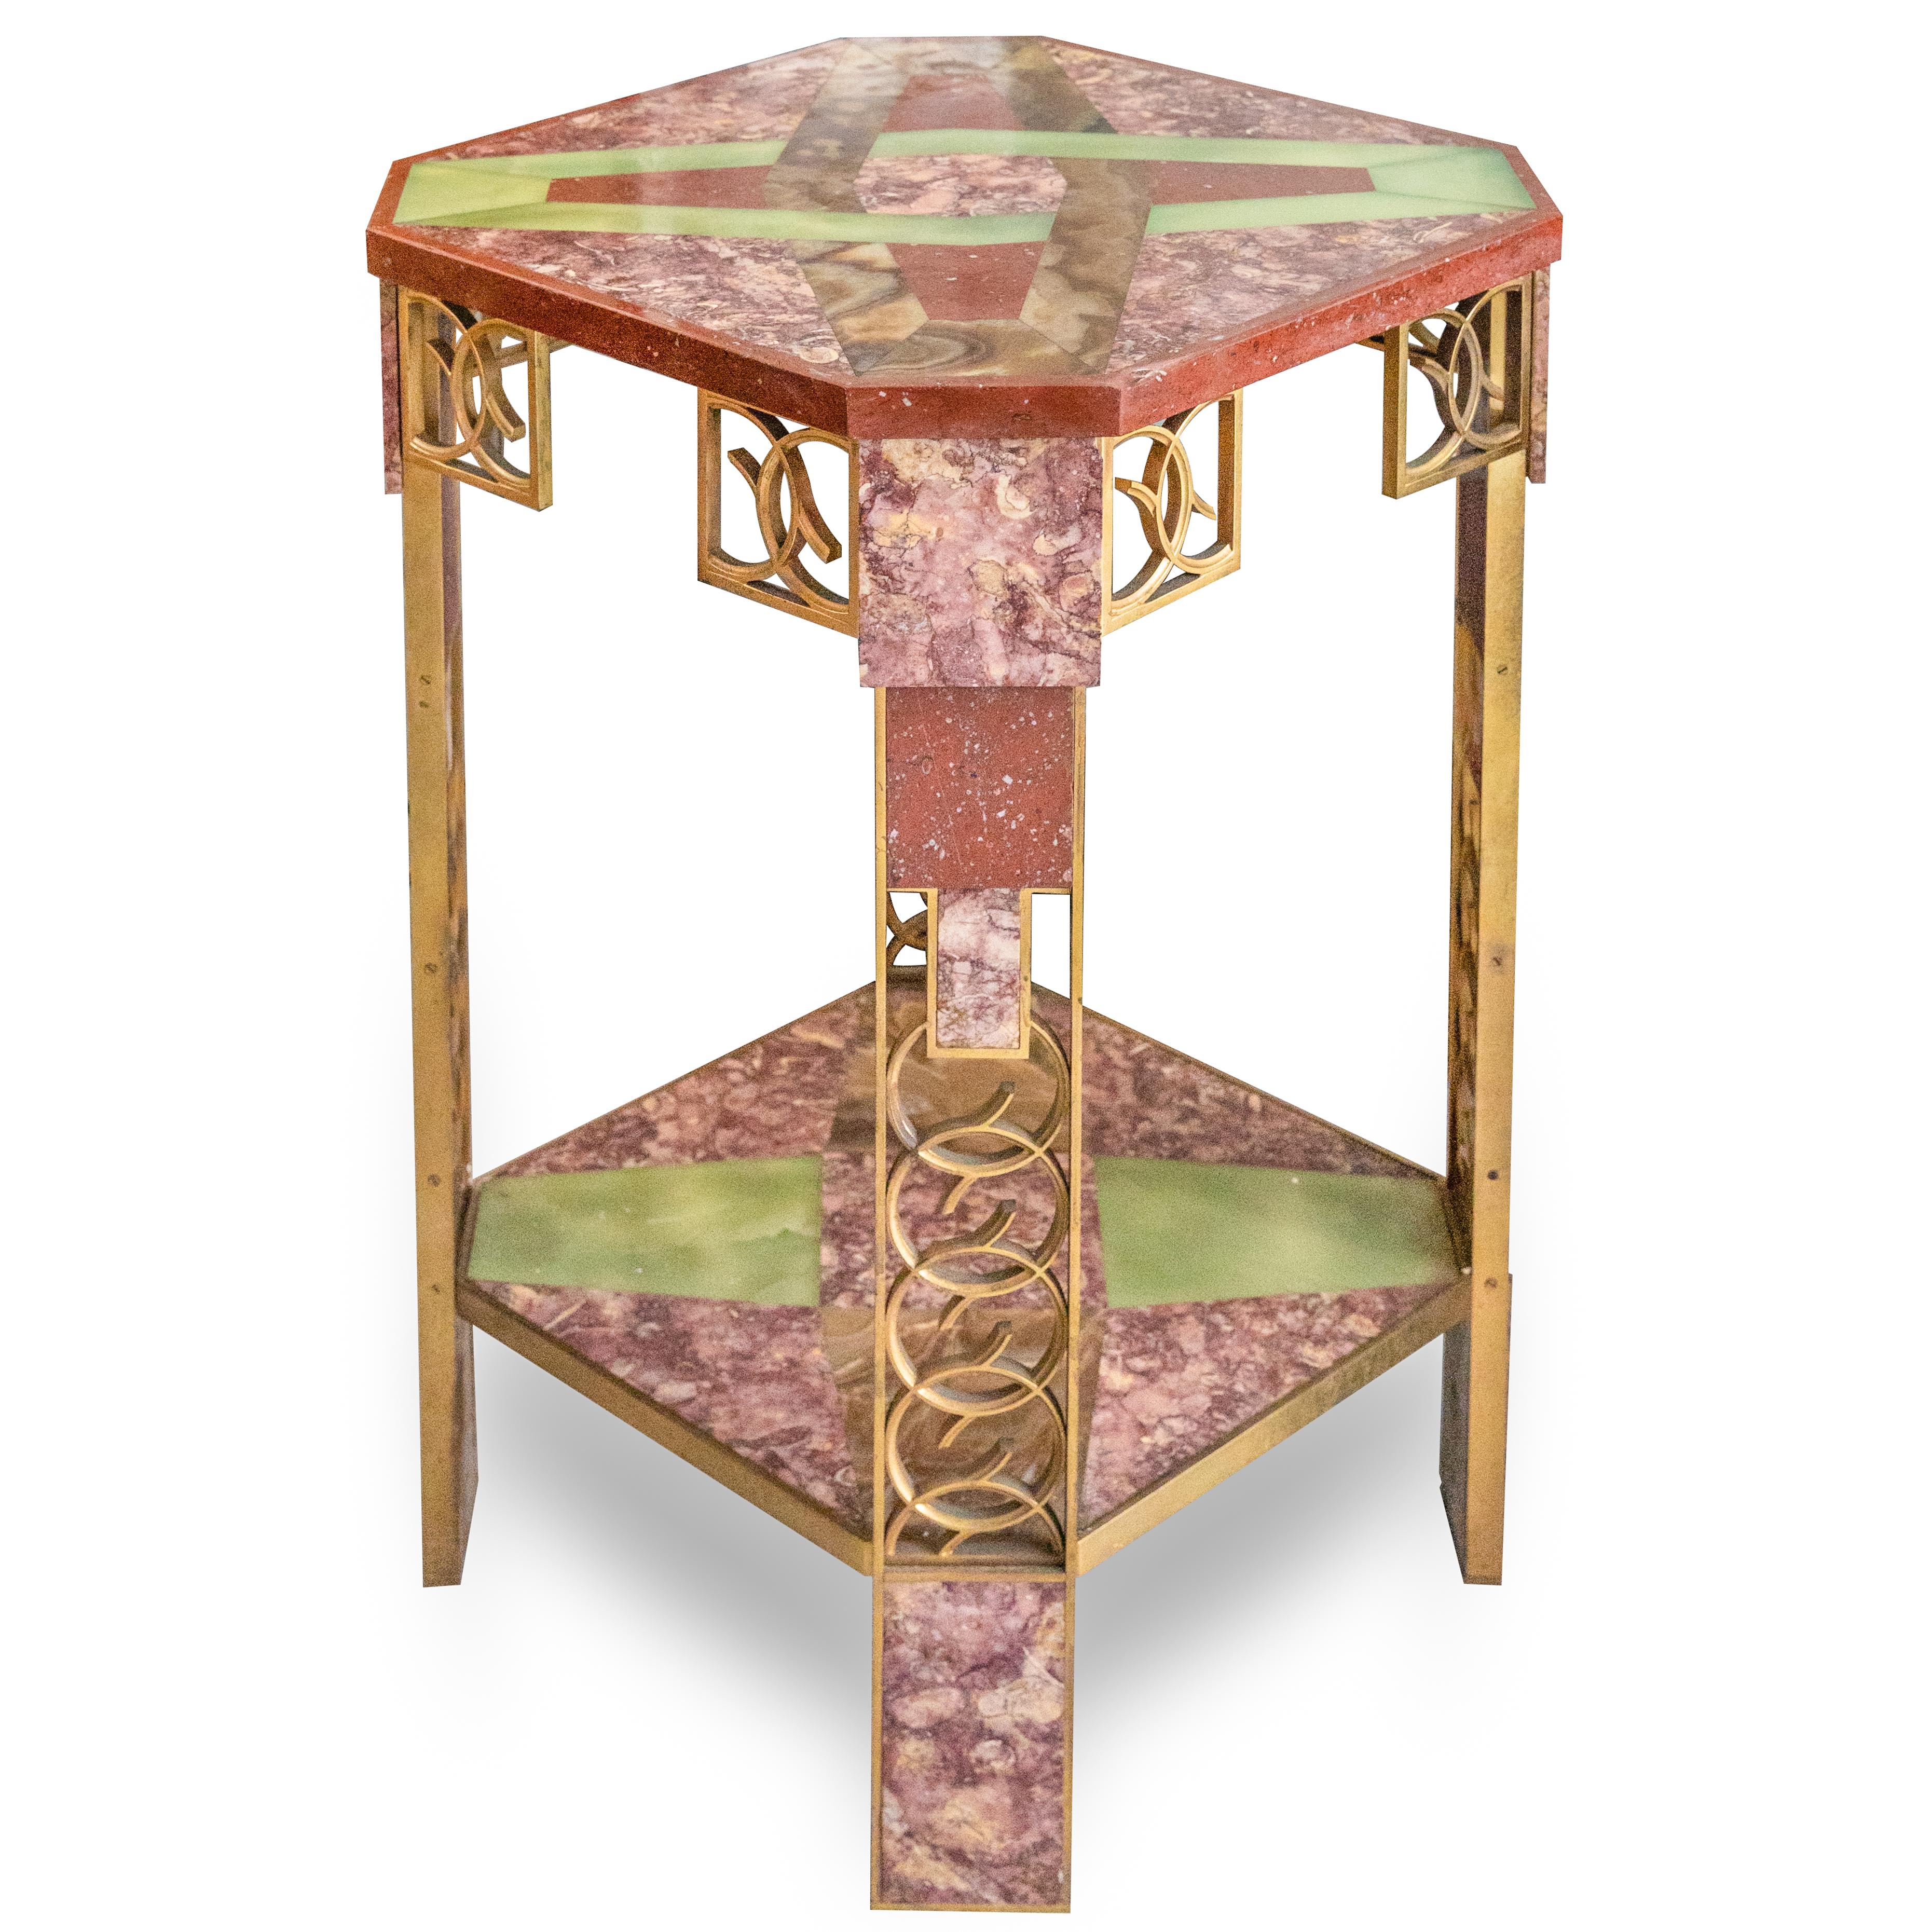 Early 20th Century Marble, Onyx, and Gilt-Bronze Side Table, French, circa 1925